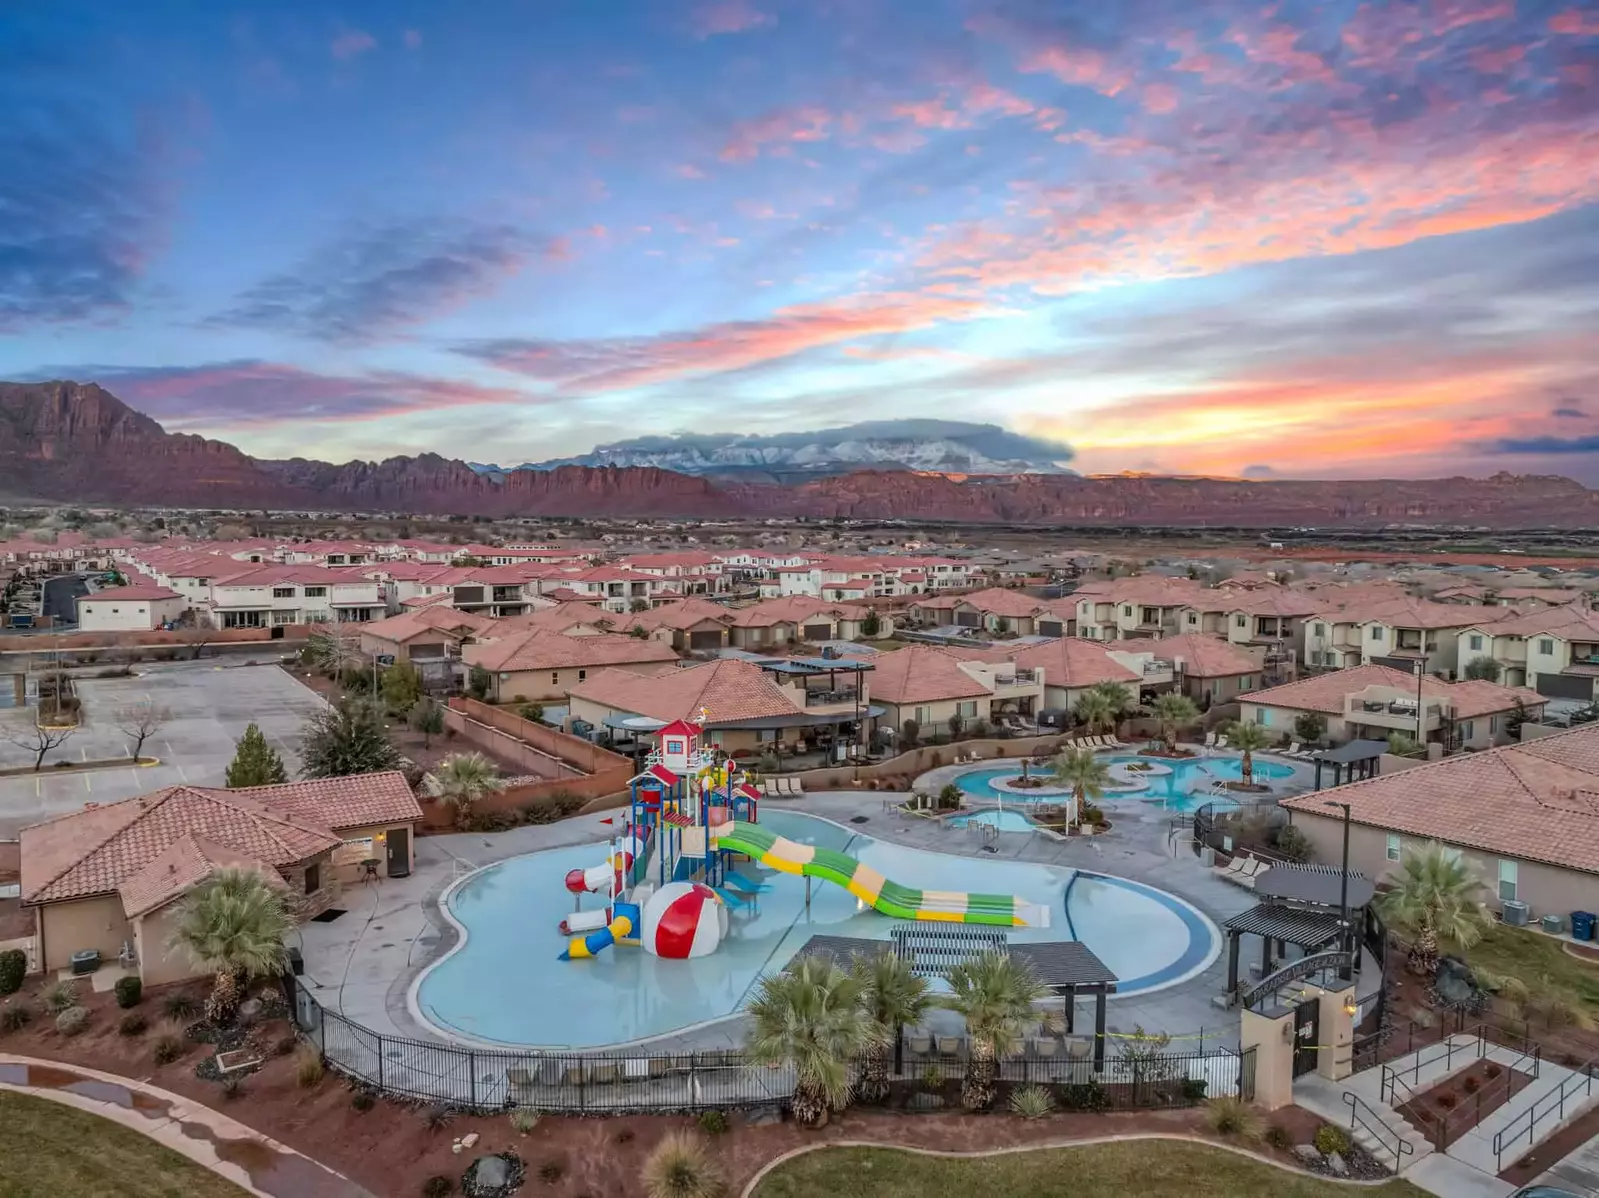 Sunset over Community Waterpark